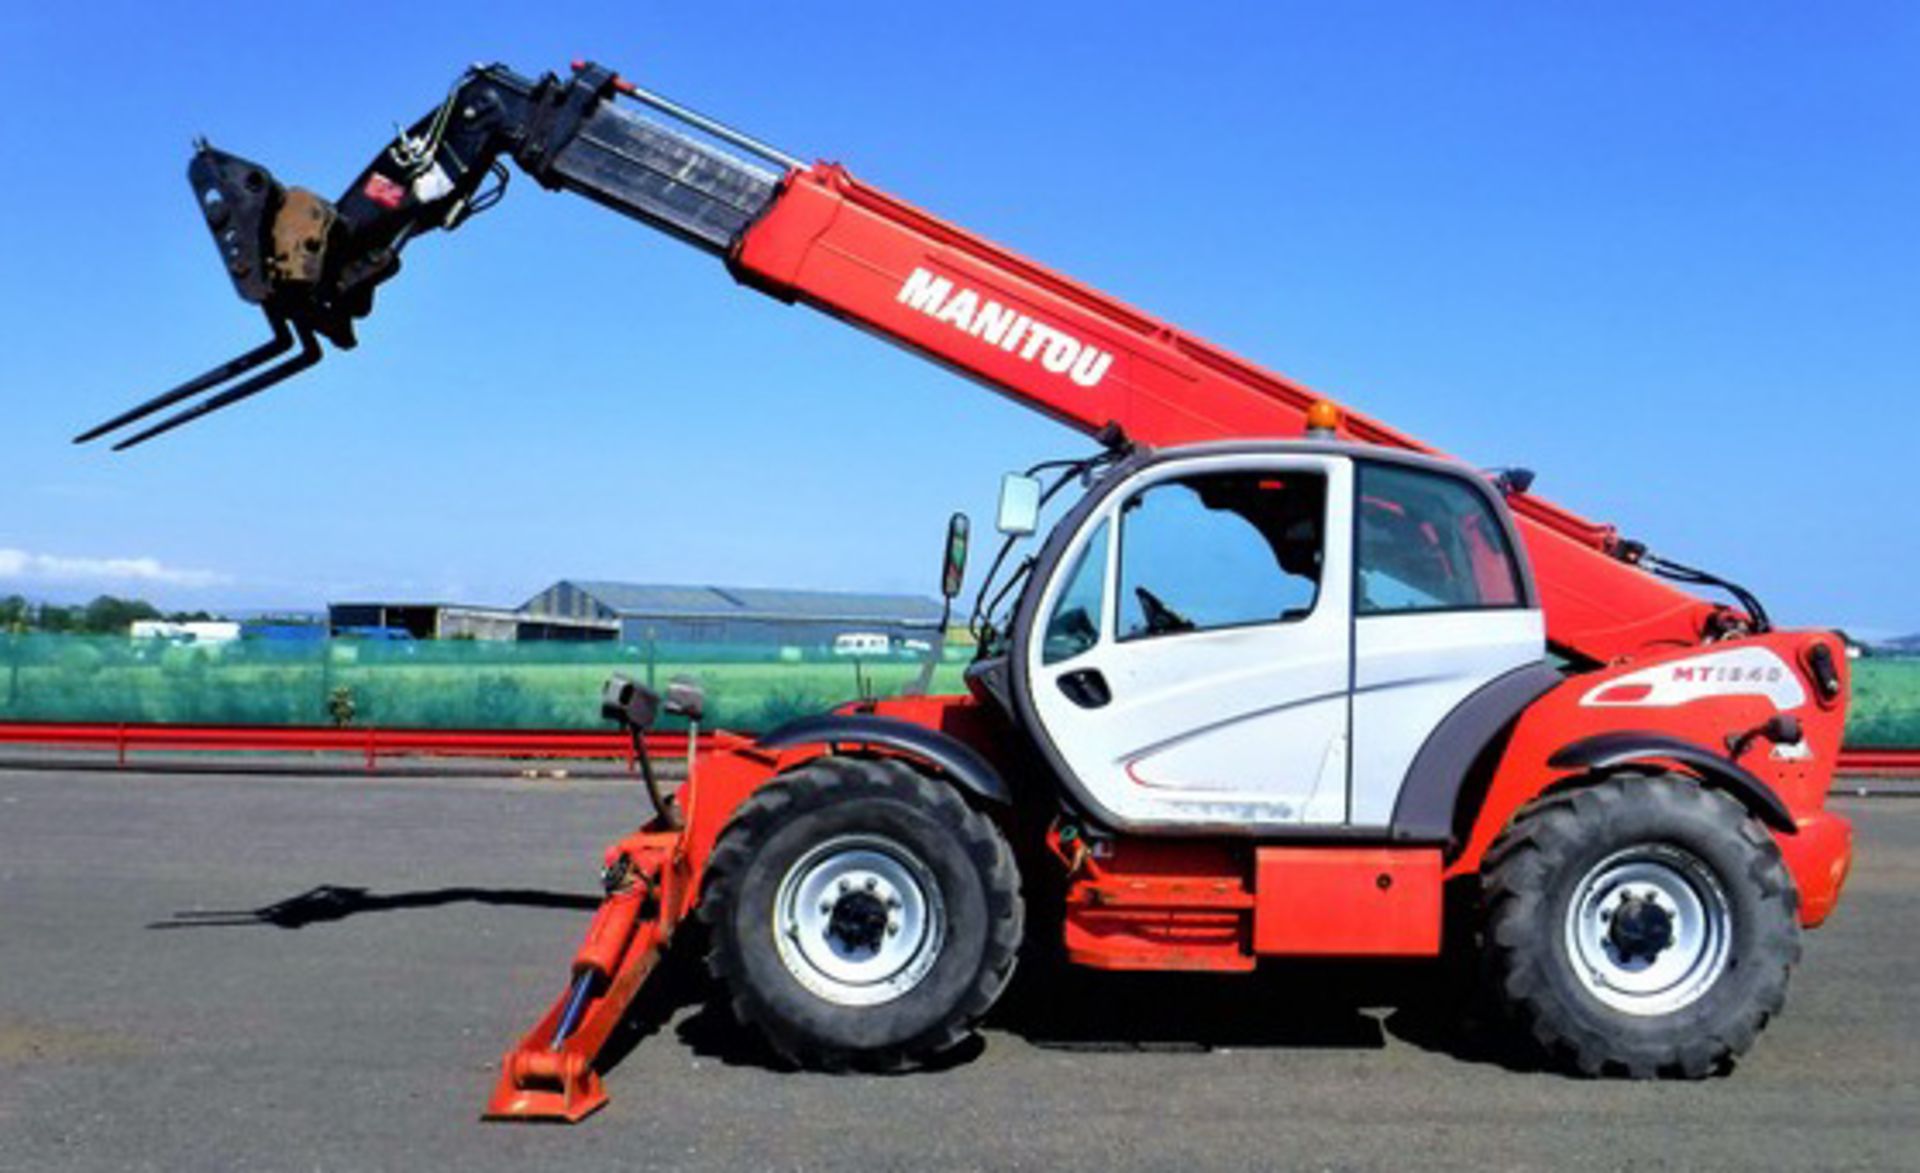 2009 MANITOU MT1840, Reg - SY59CFK. S/N - 258408. 4209 hrs (not verified). C/W set of forks - Image 2 of 13